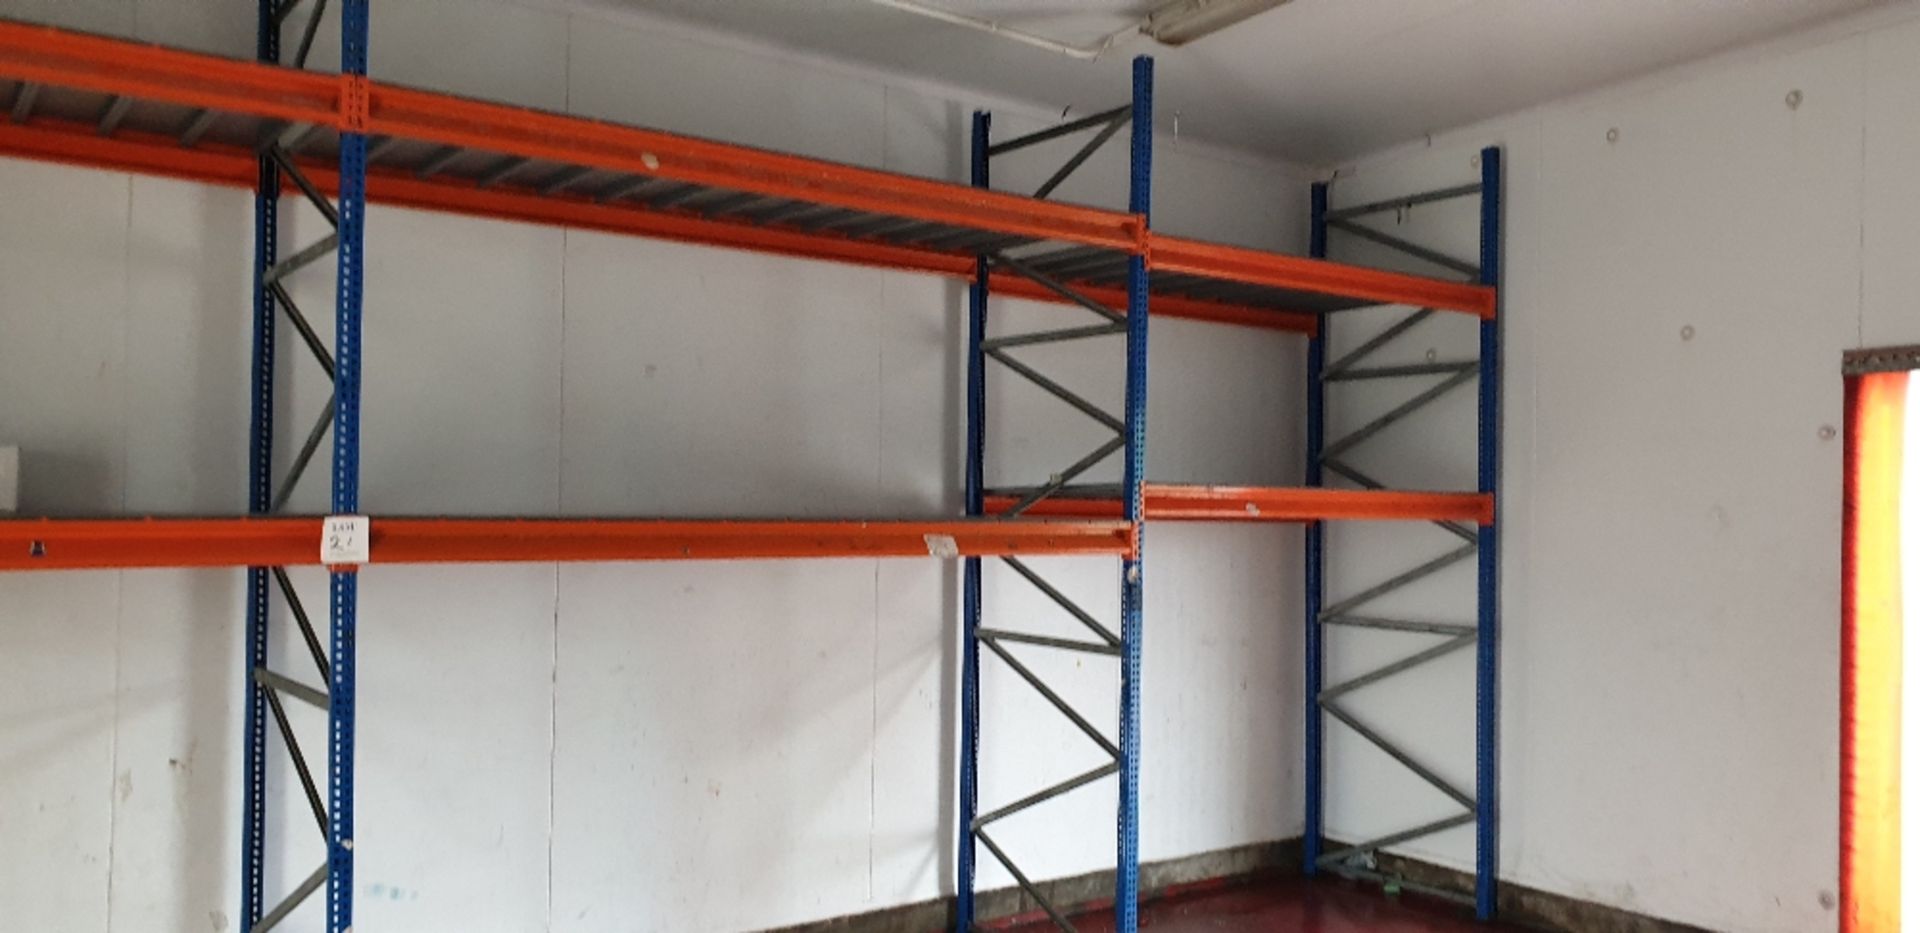 4 - Bays of pallet racking with steel panel shelving - Image 2 of 4